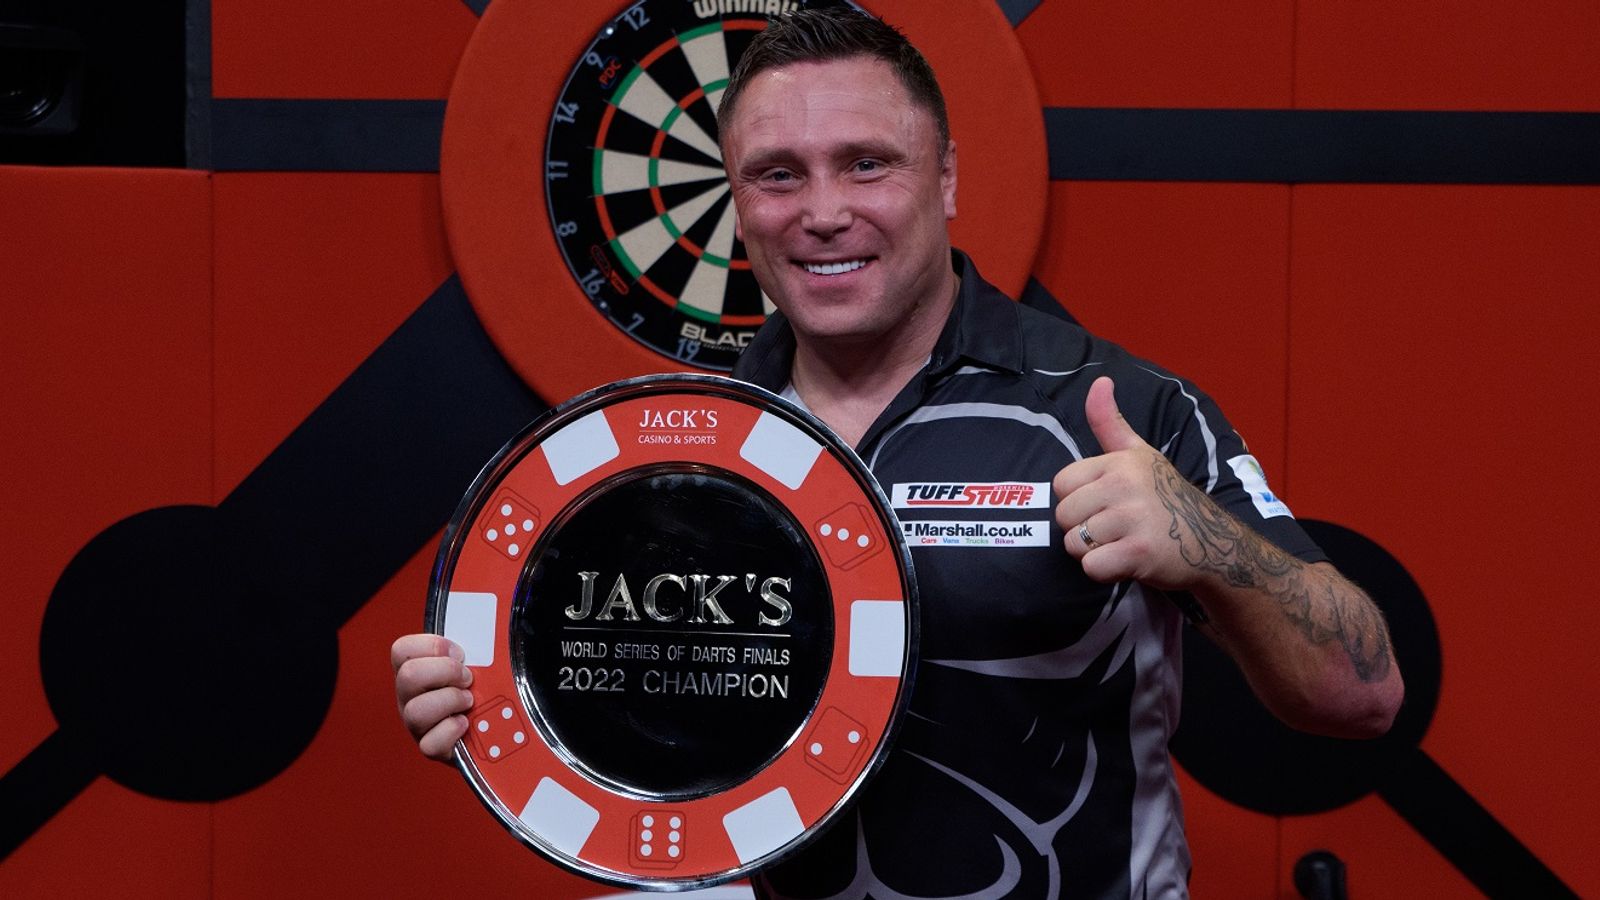 Gerwyn Price warns rivals he will be ‘unbeatable’ following latest success at World Series of Darts Finals